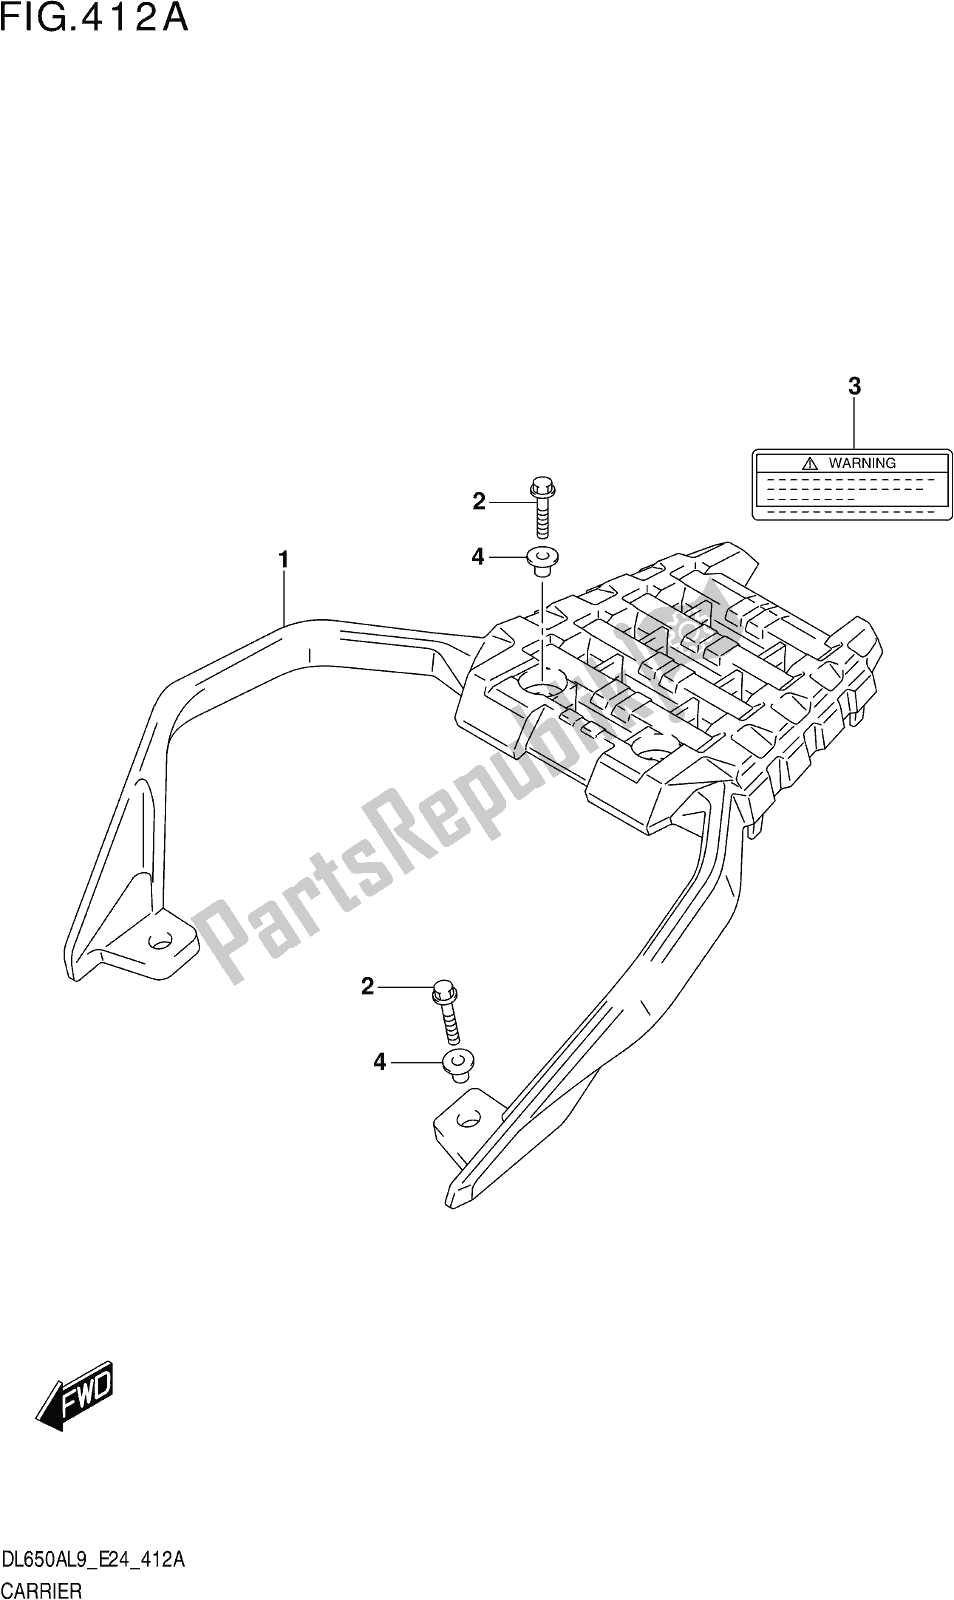 All parts for the Fig. 412a Carrier of the Suzuki DL 650A V Strom 2019